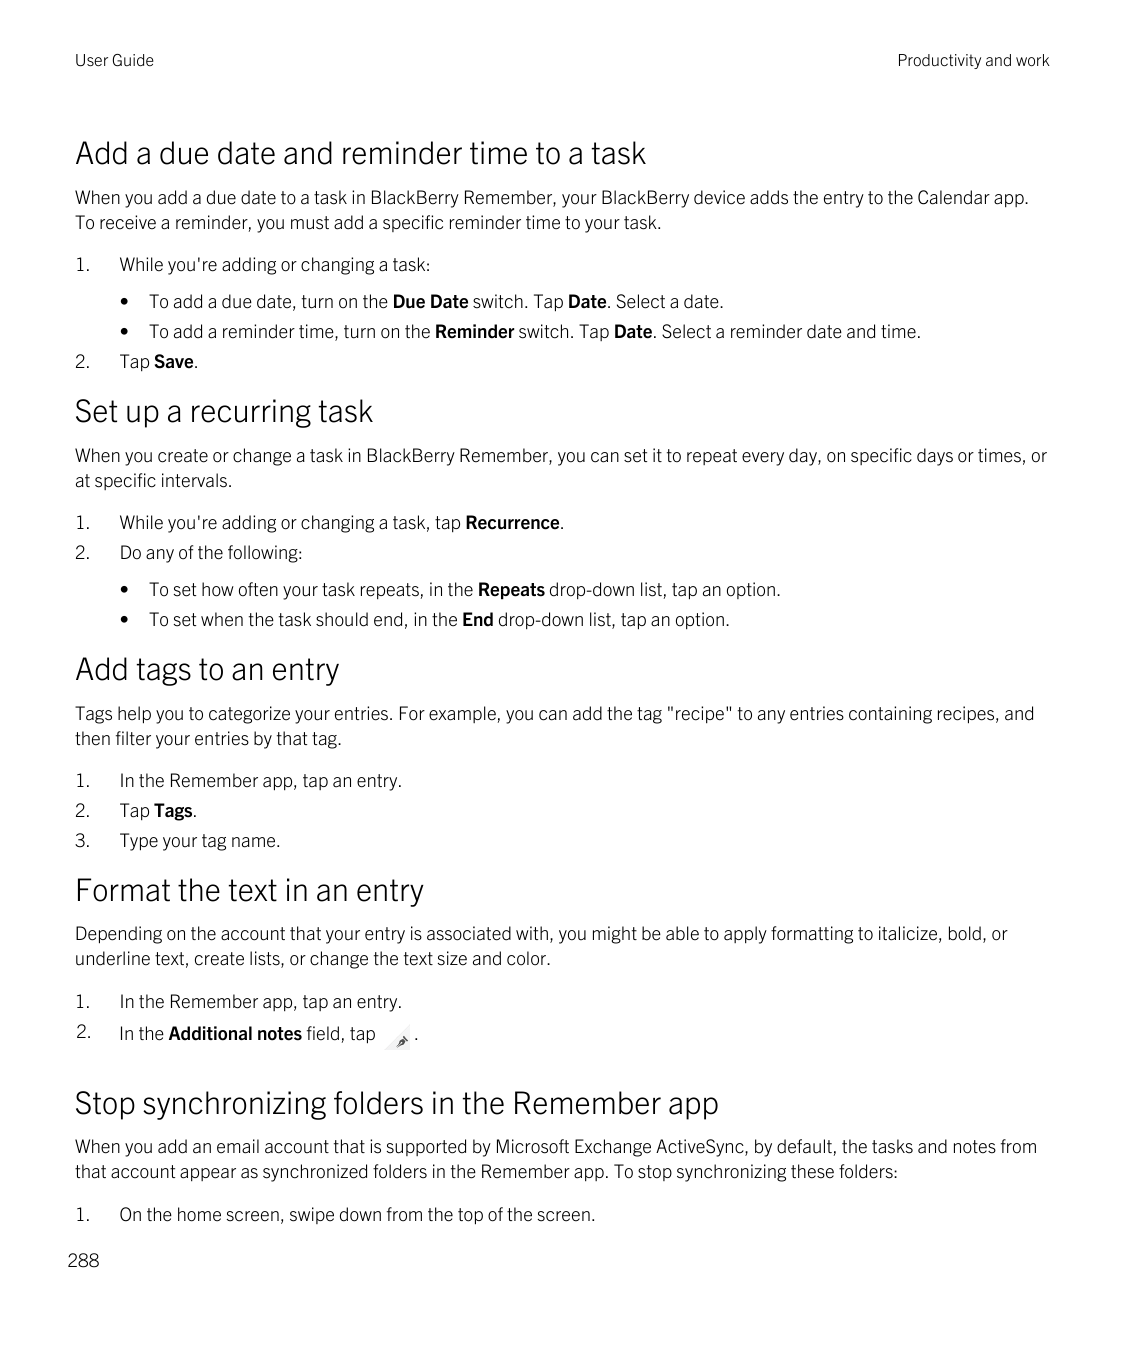 User GuideProductivity and workAdd a due date and reminder time to a taskWhen you add a due date to a task in BlackBerry Remembe